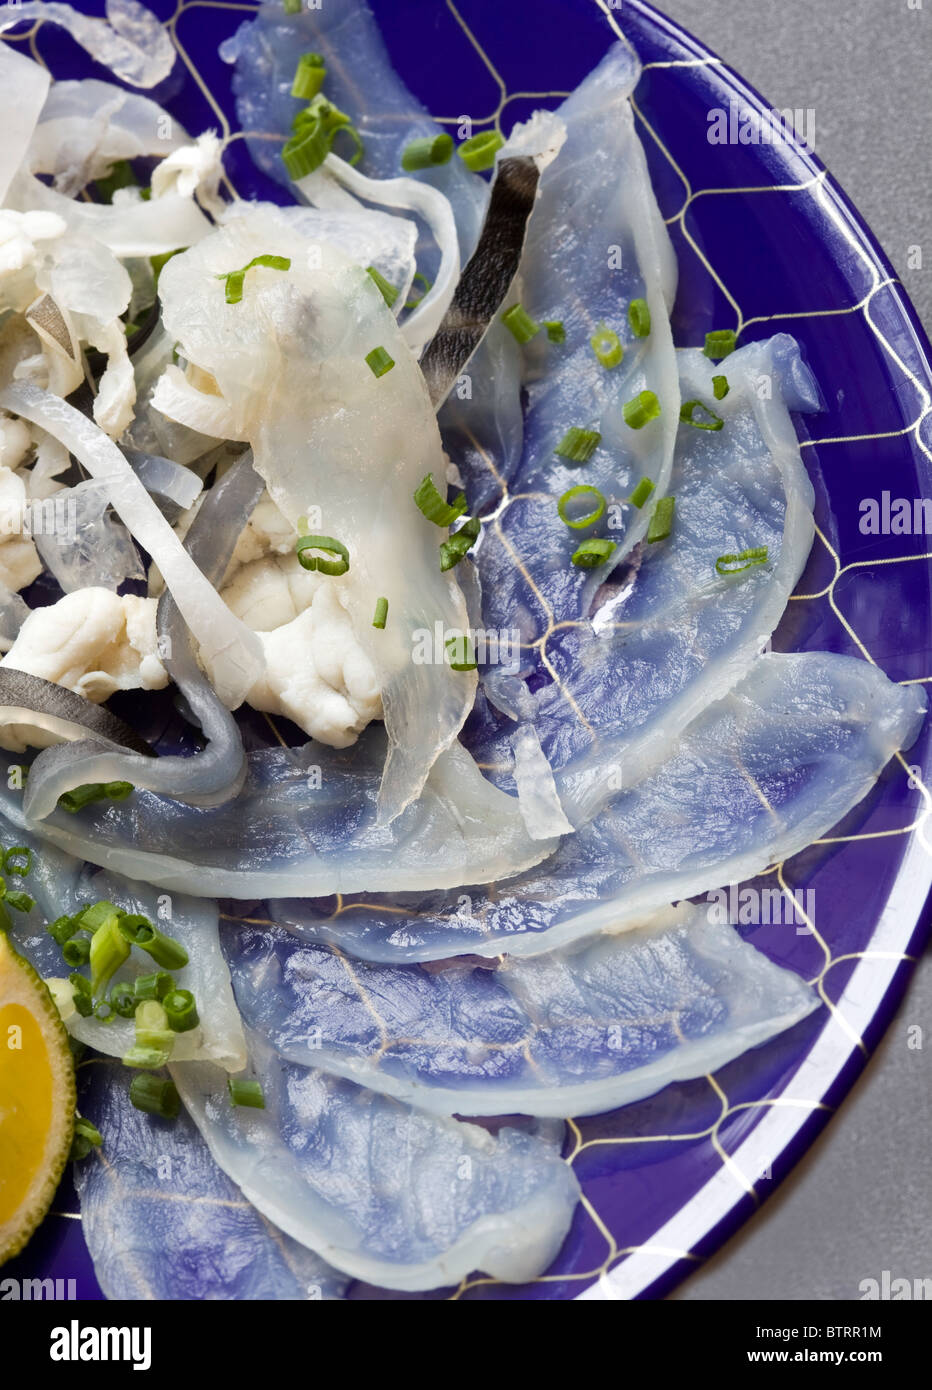 Plate of Fugu or Pufferfish in Tolkyo Japan Stock Photo